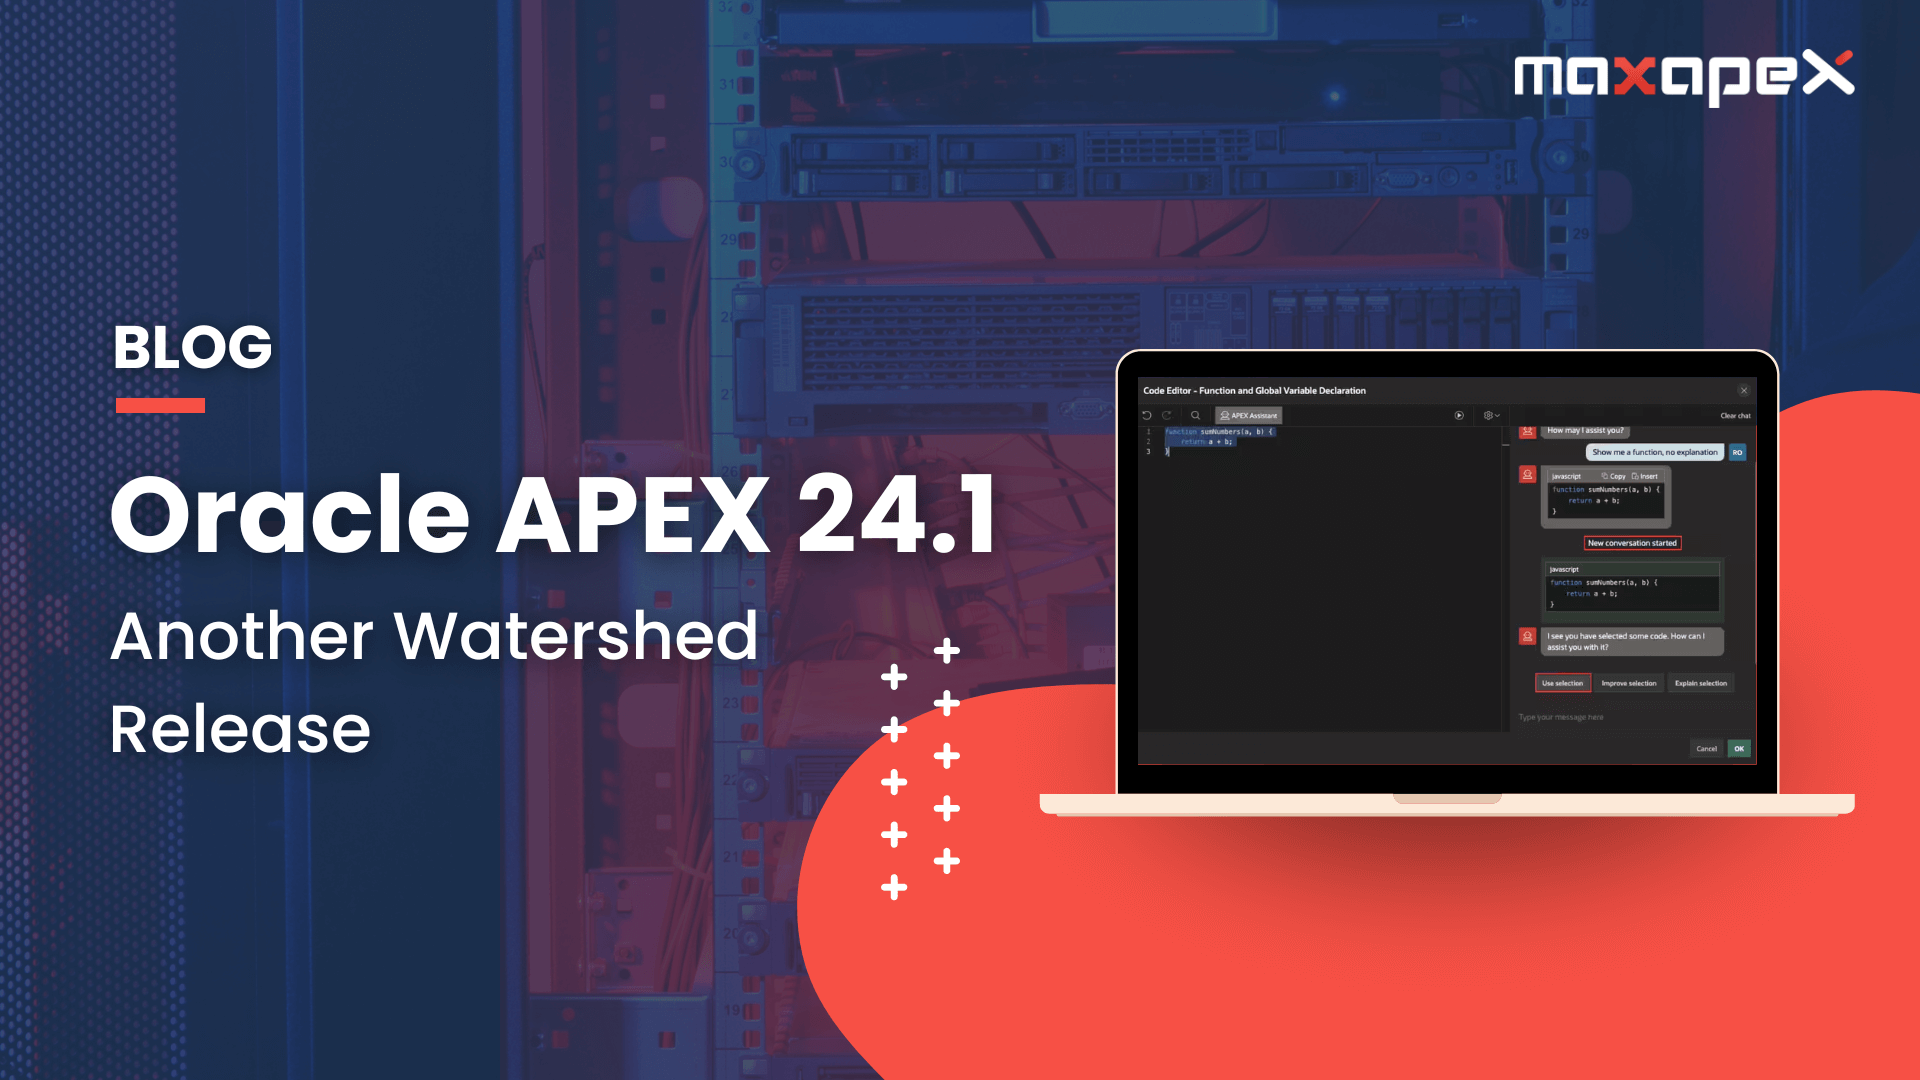 Oracle APEX 24.1 – Another Watershed Release